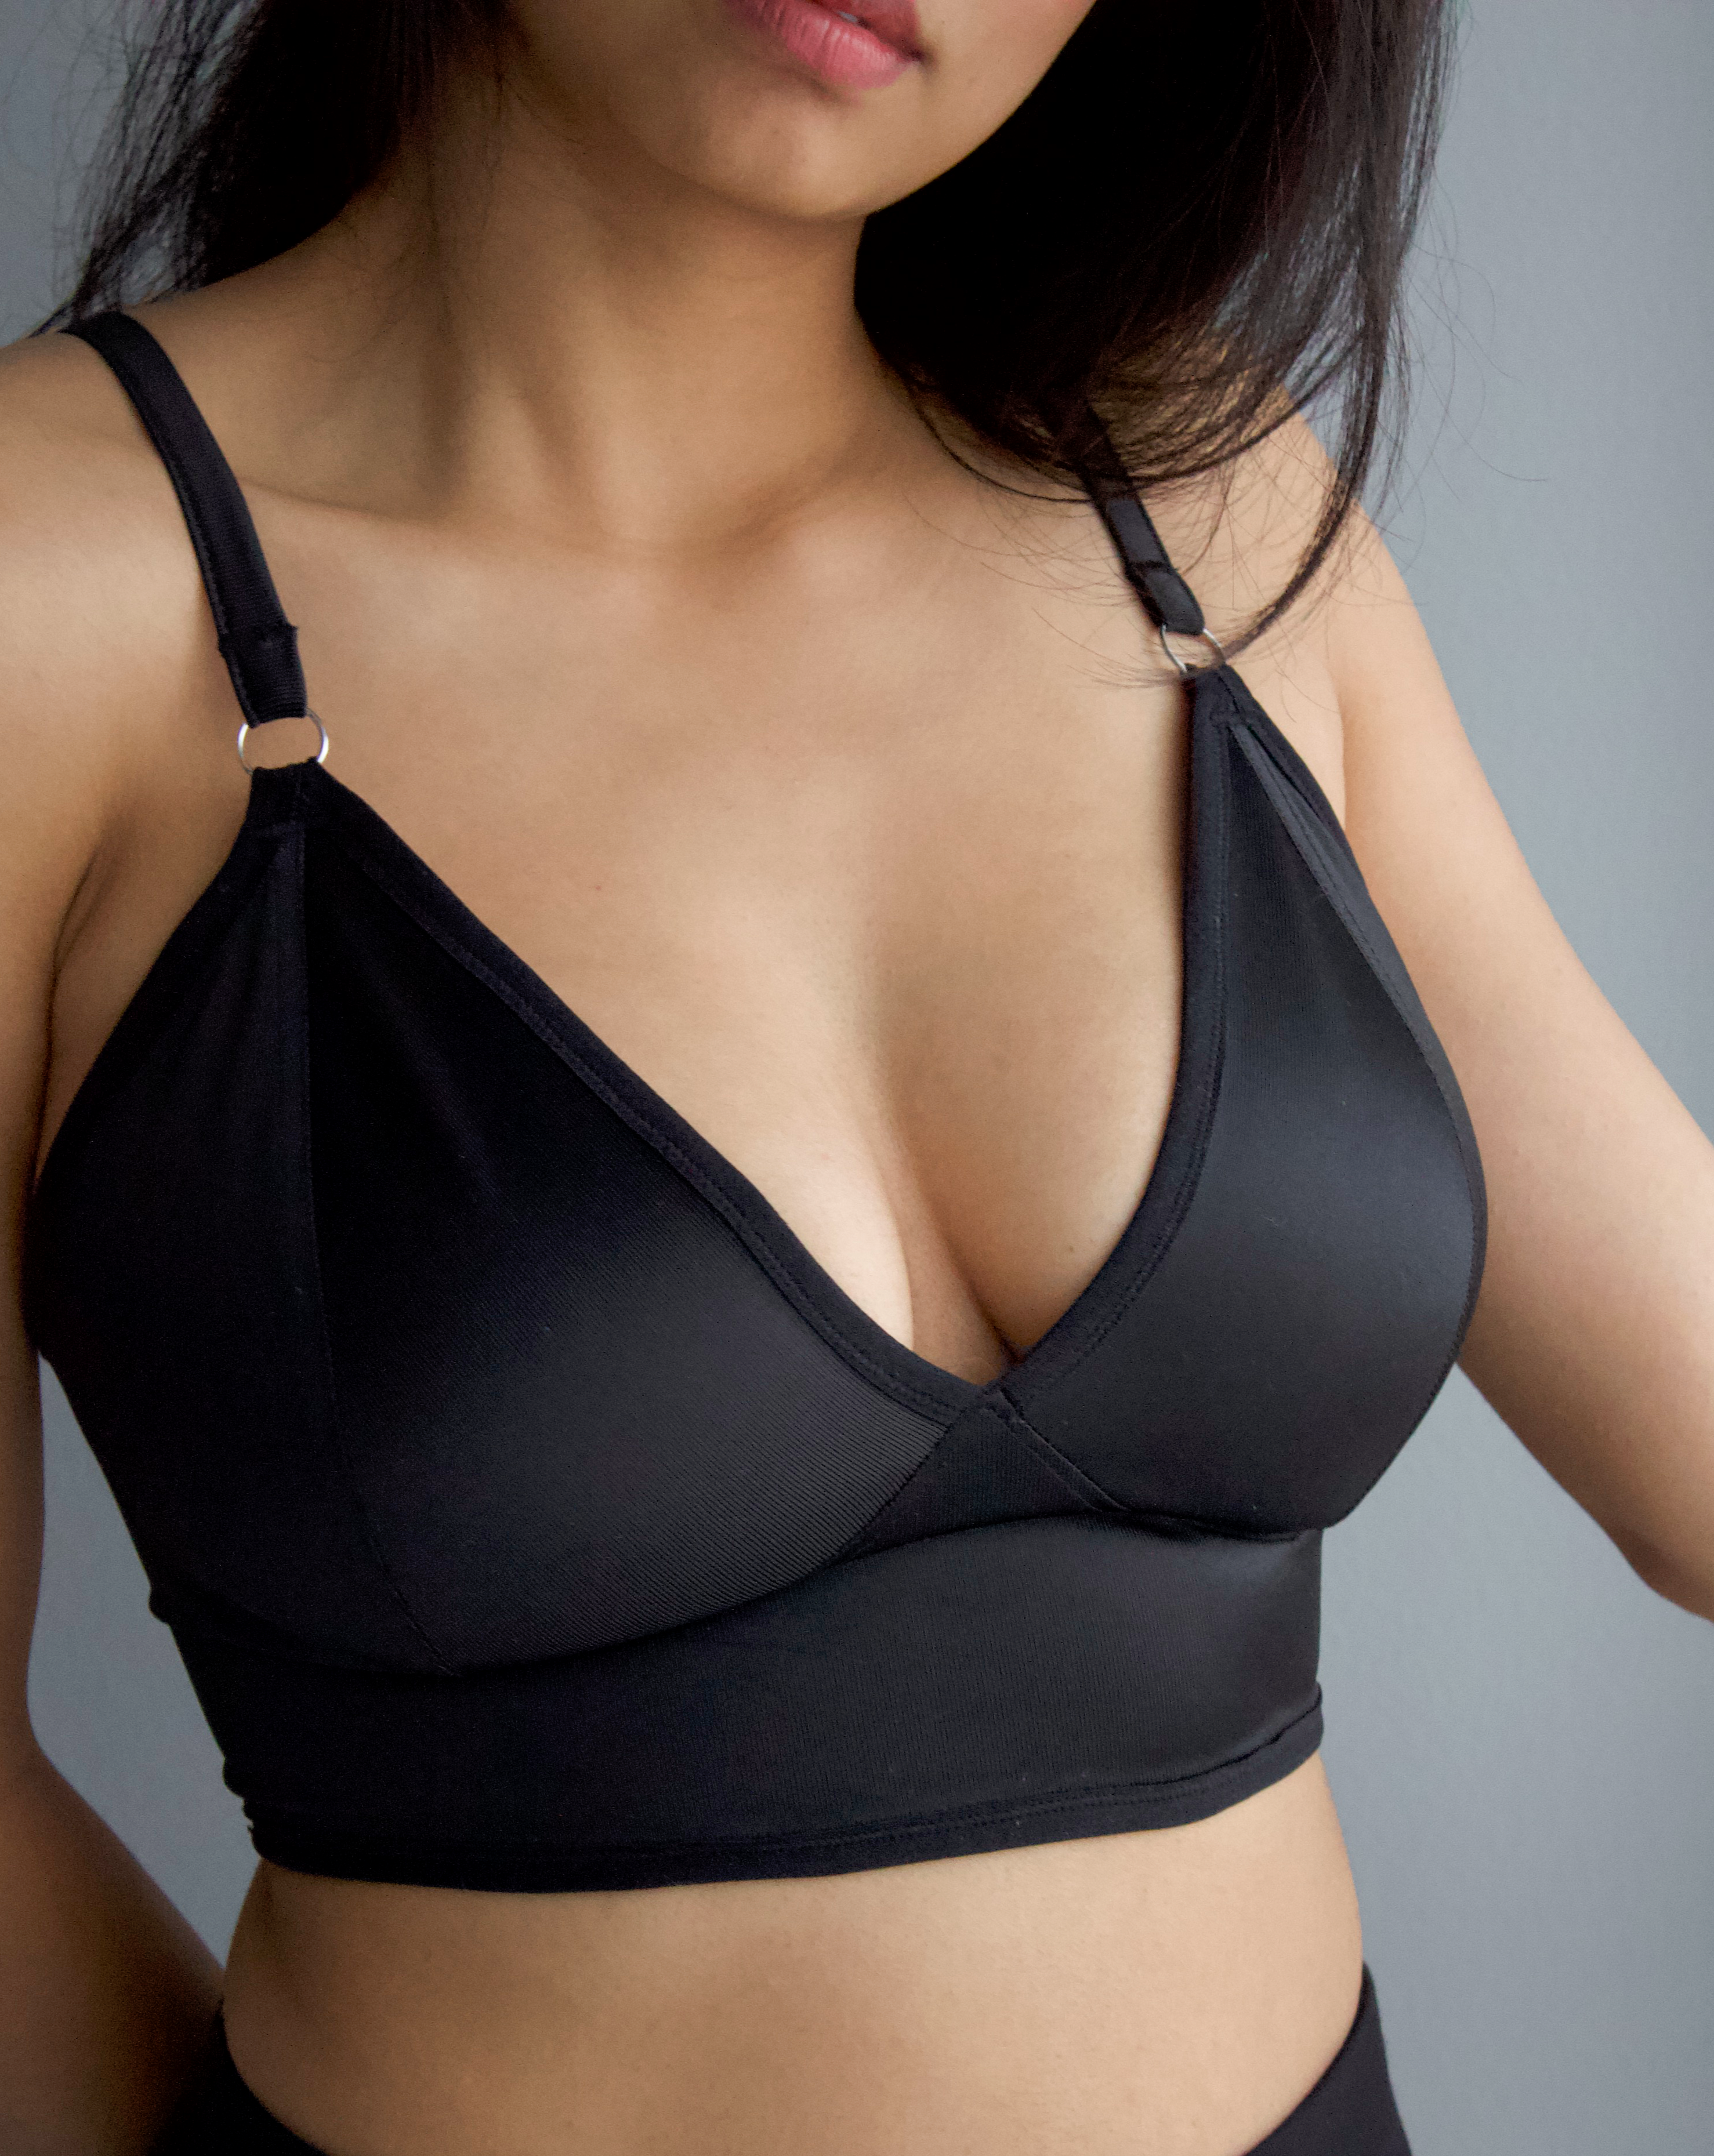 Rubies Bras client and model wearing our Sahaara Solids in stretch satin black. Close up.